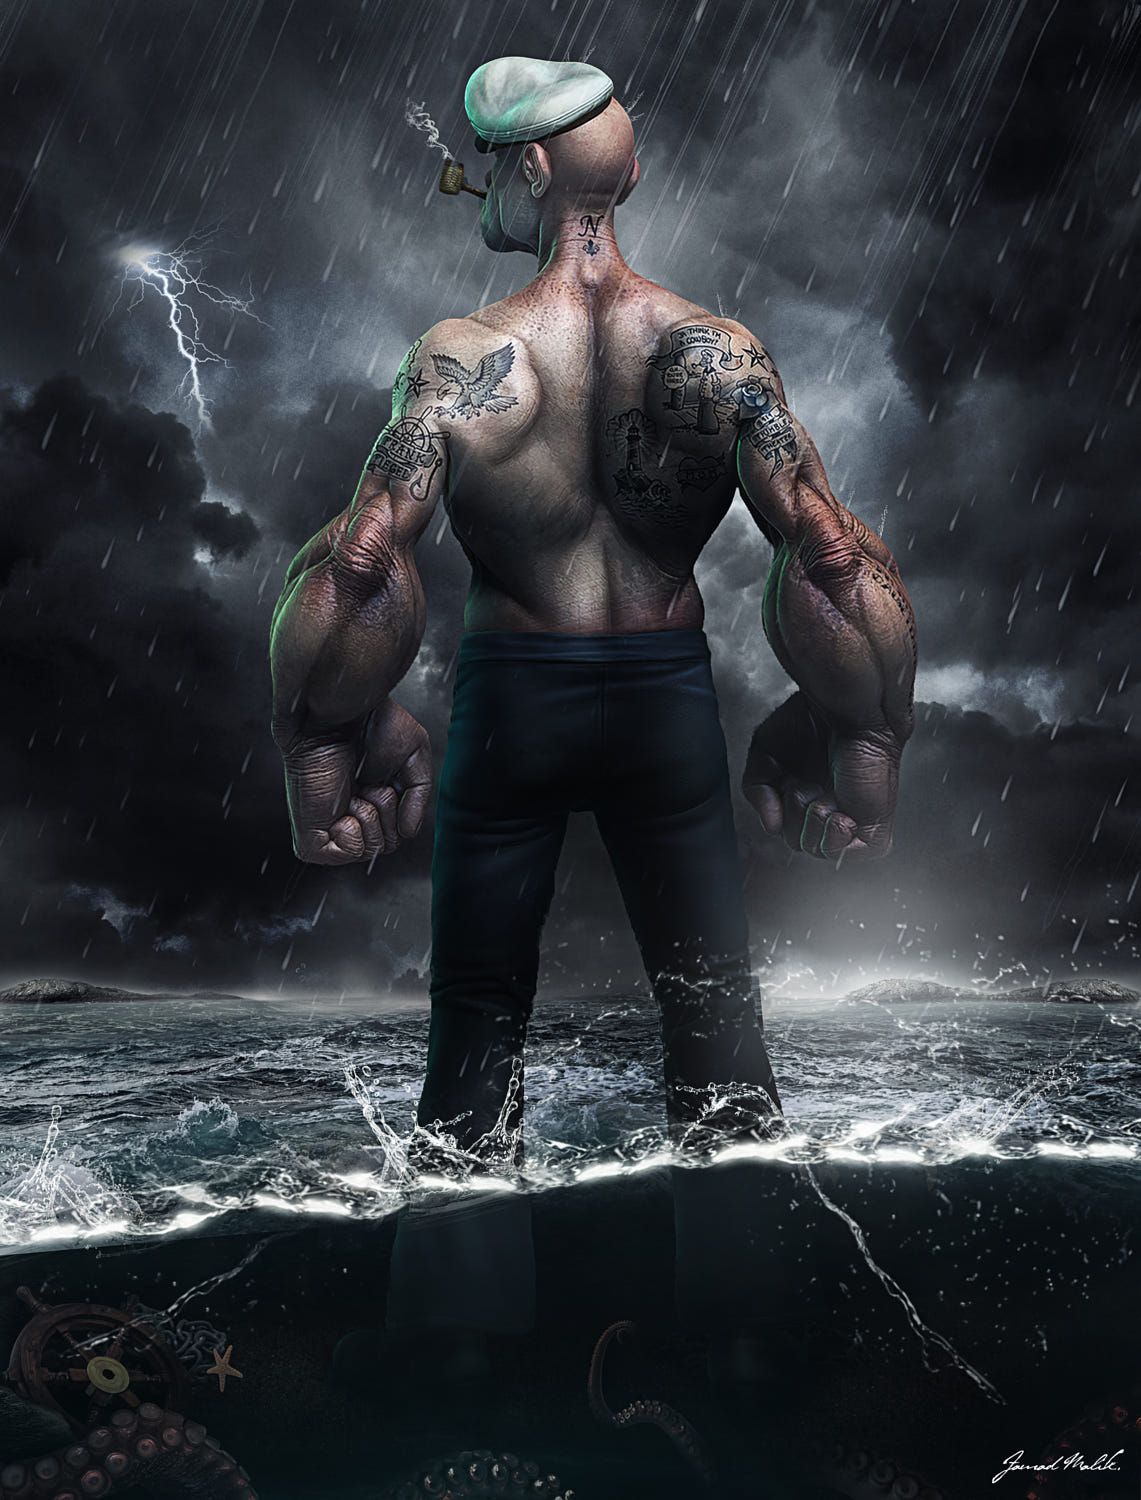 🔥 Download Popeye By Fawad Malik On 500px The Sailor by tchambers